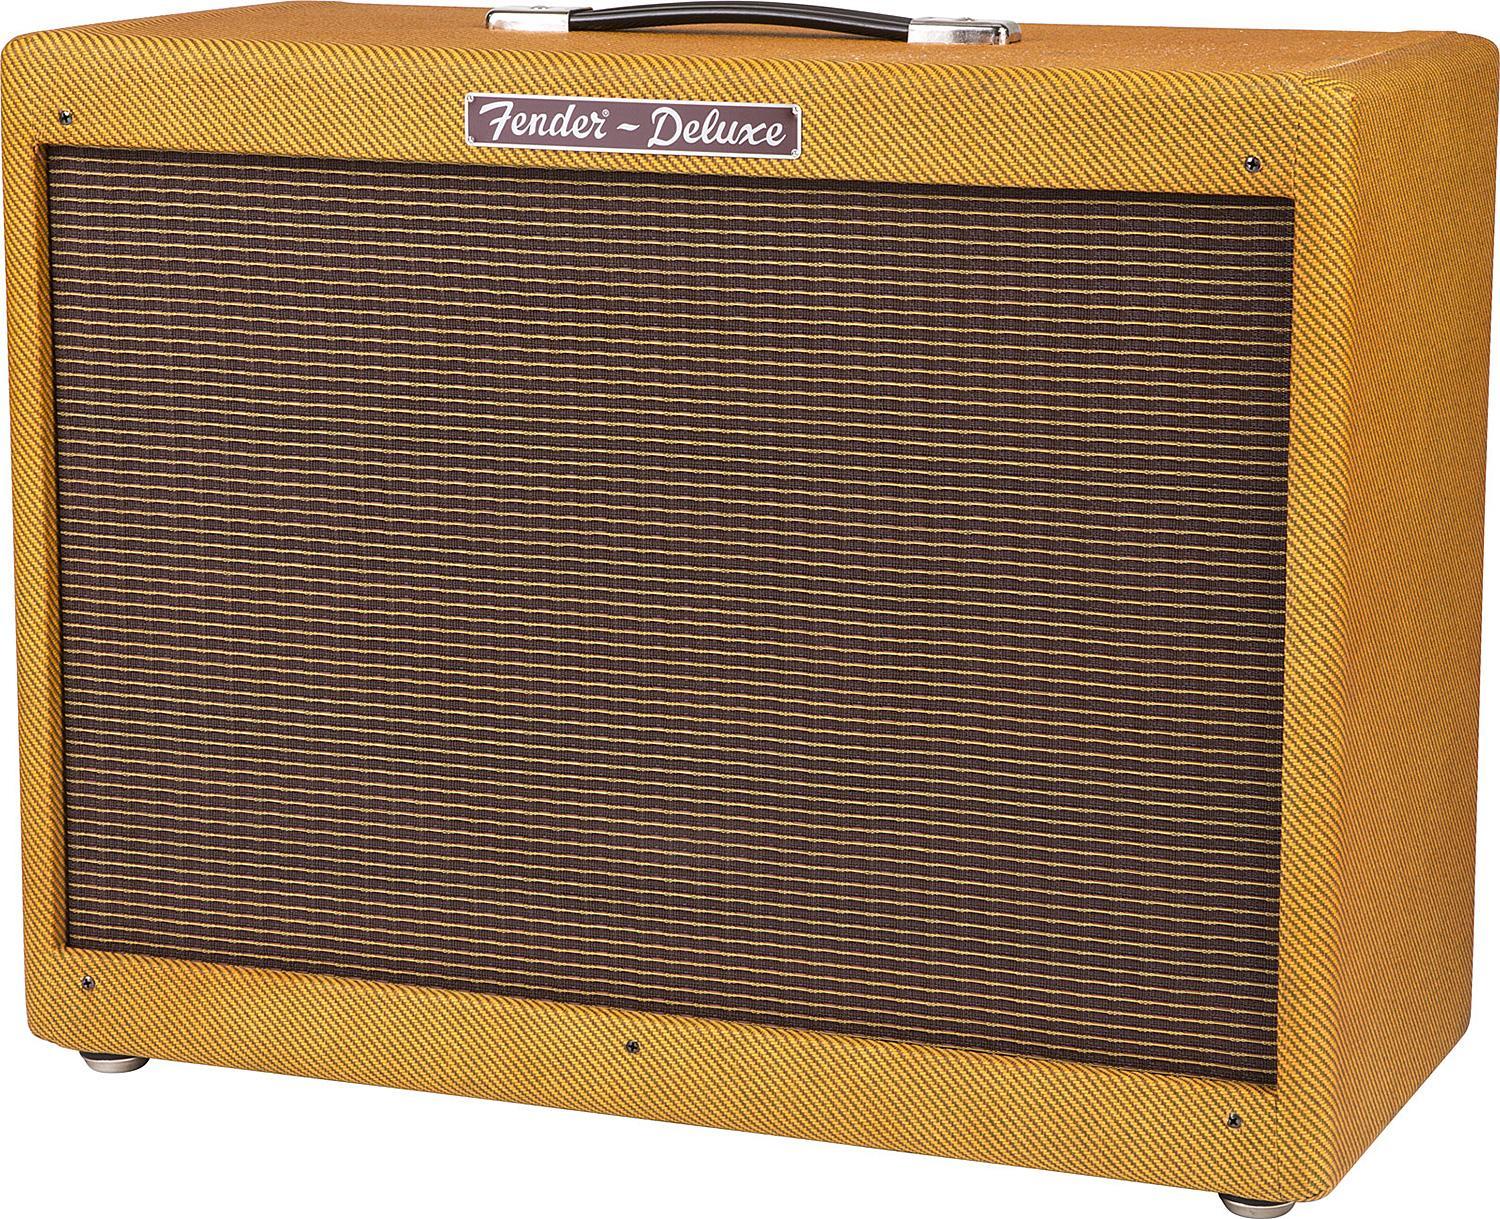 Electric guitar amp cabinet Fender Hot Rod Deluxe 112 Enclosure - Lacquered Tweed